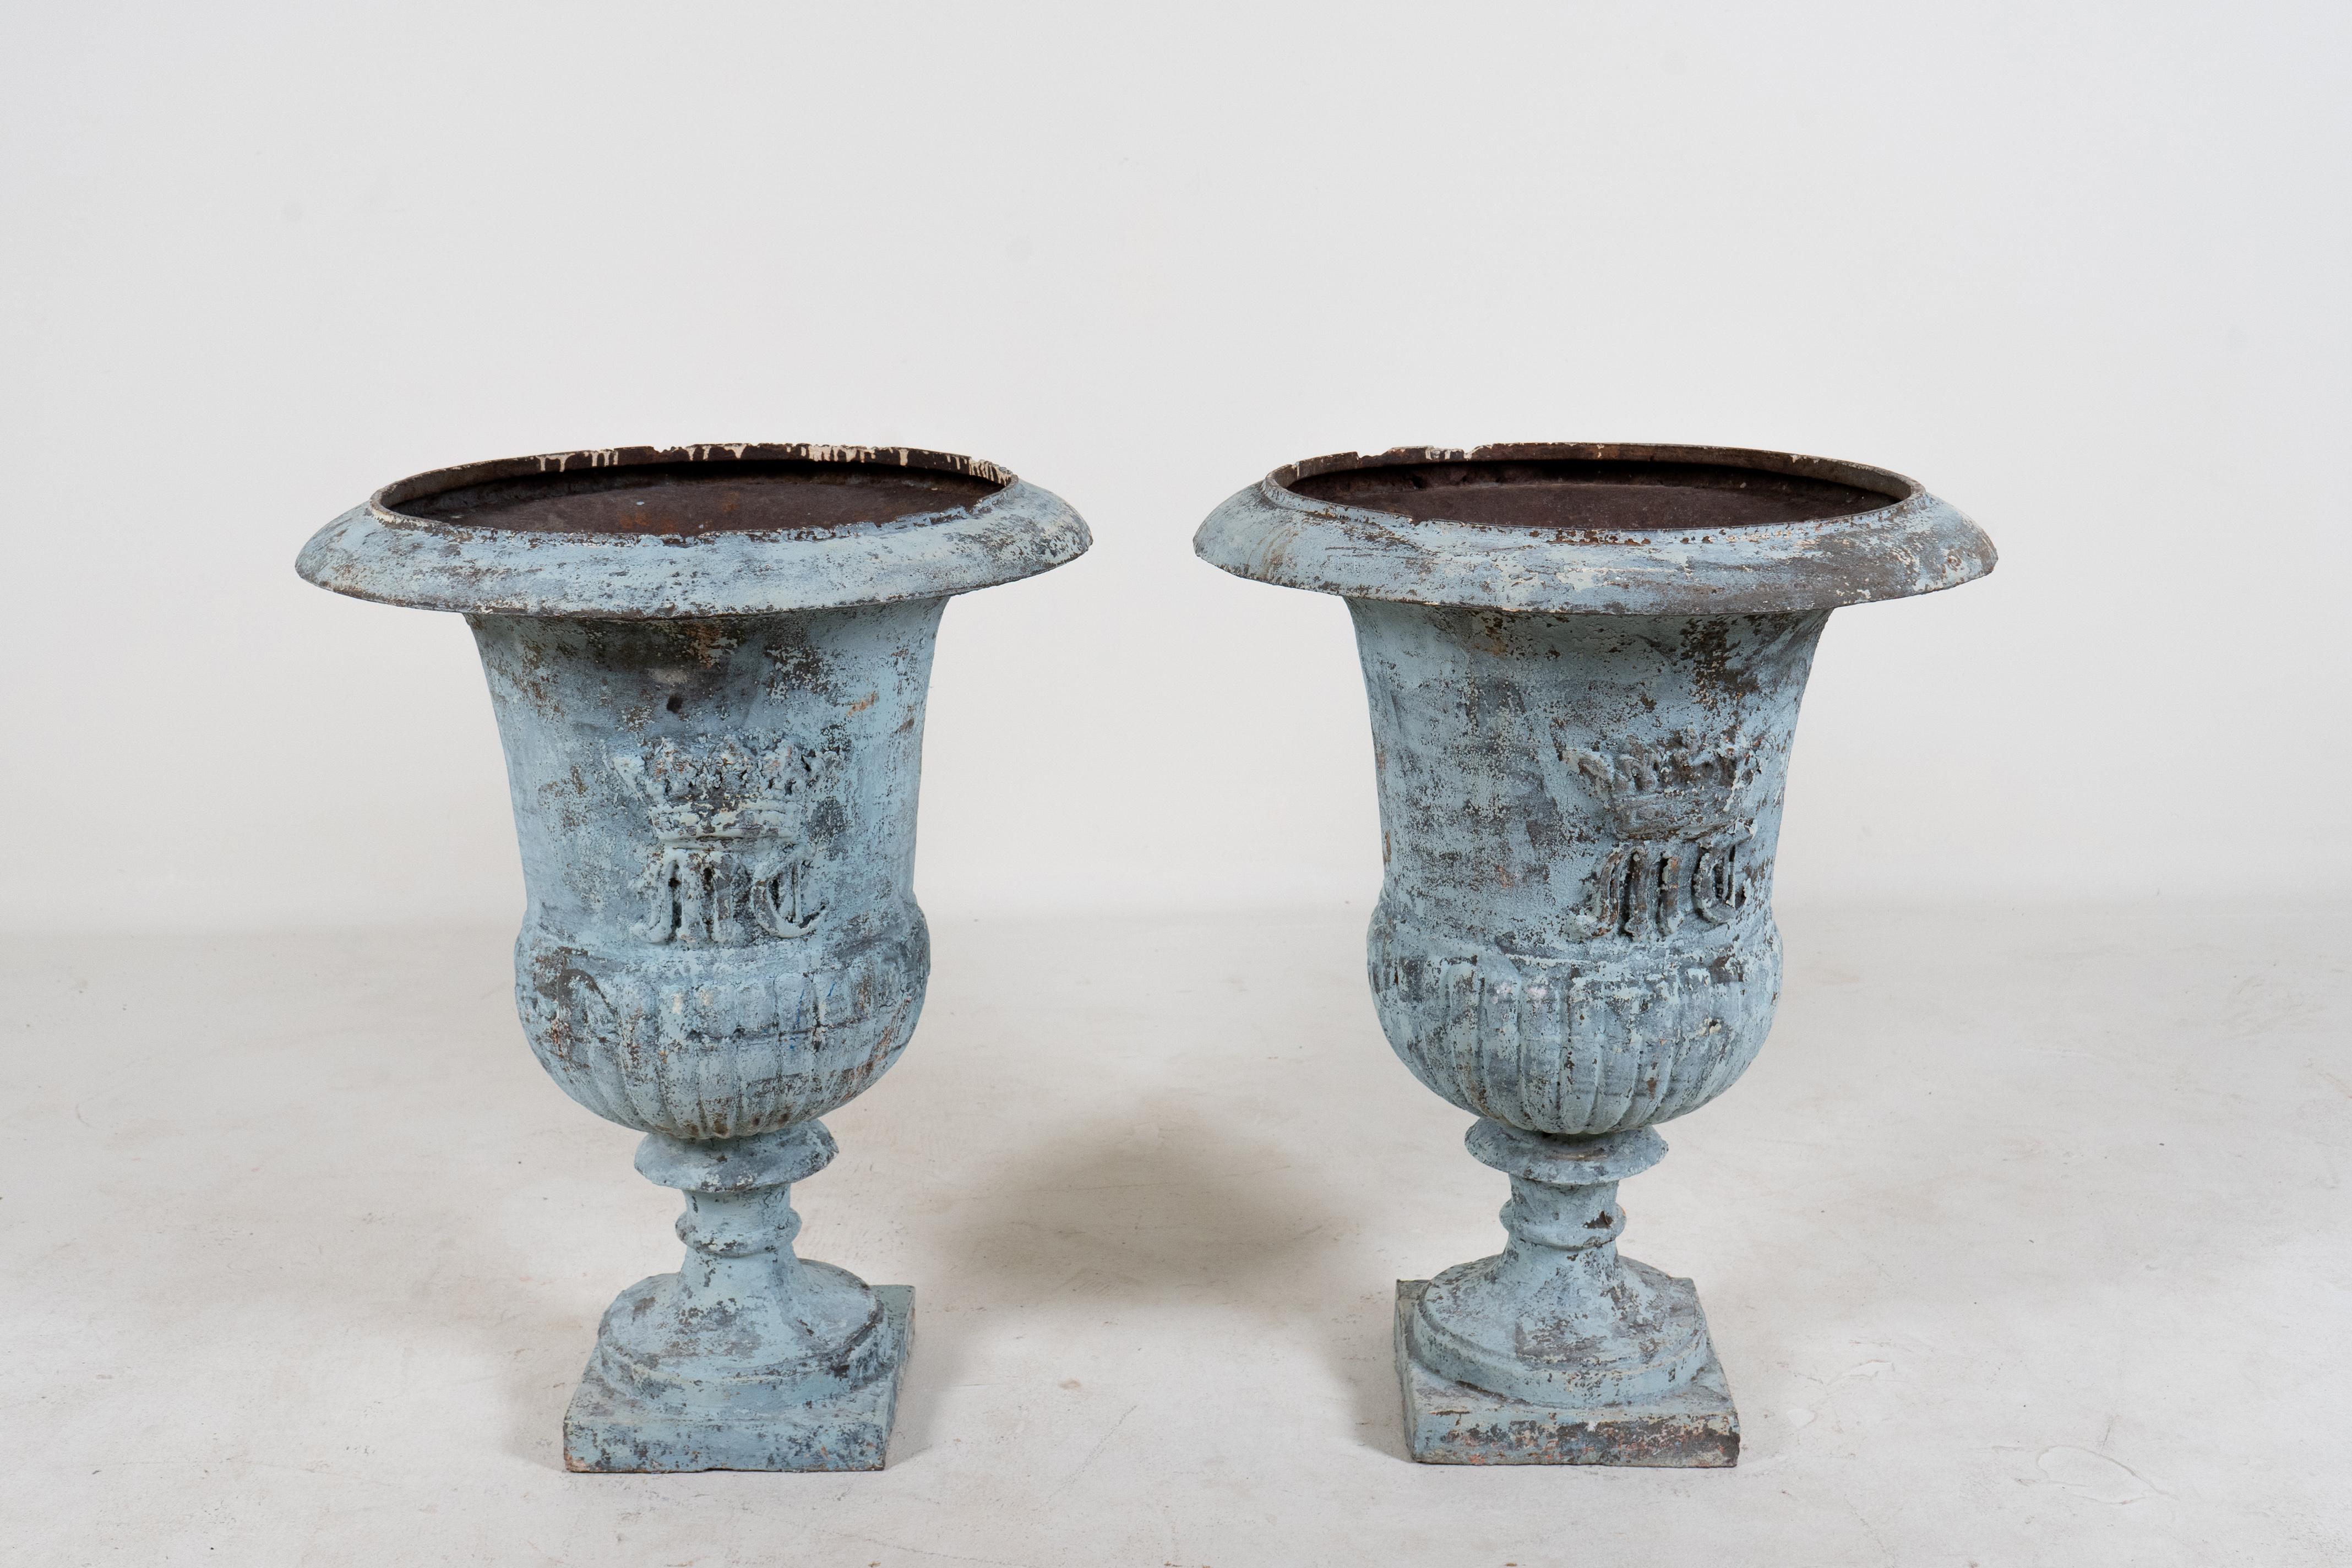 A superb pair of antique French cast iron garden urn planters circa 1900. These elegant campana jardinieres are the quintessential classic French garden urns. While originally used outdoors they can be used indoors as dramatic accessories to